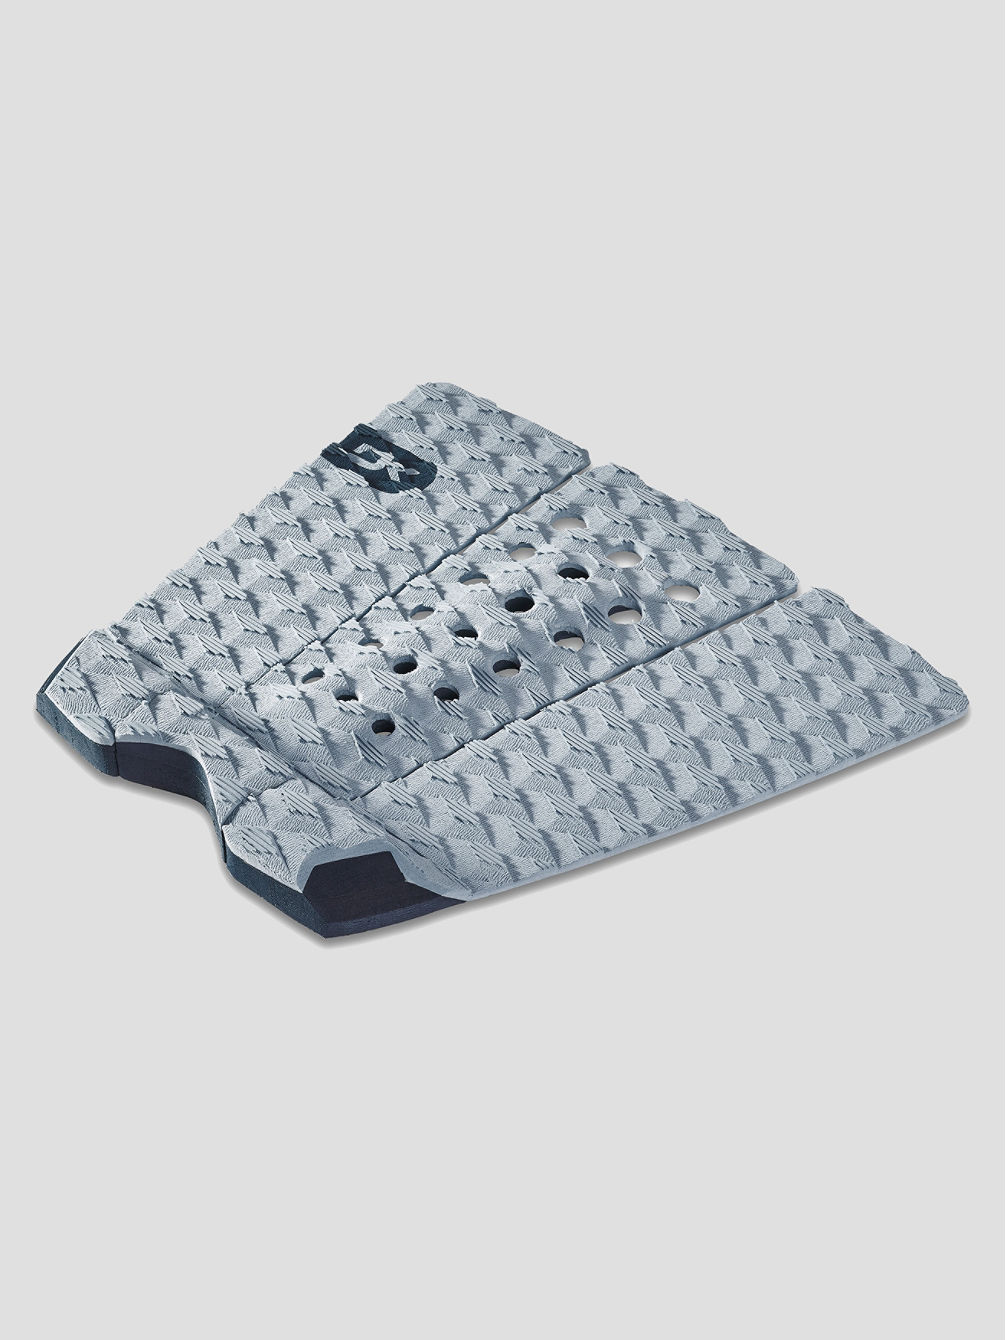 Albee Layer Pro Traction Tail Pad